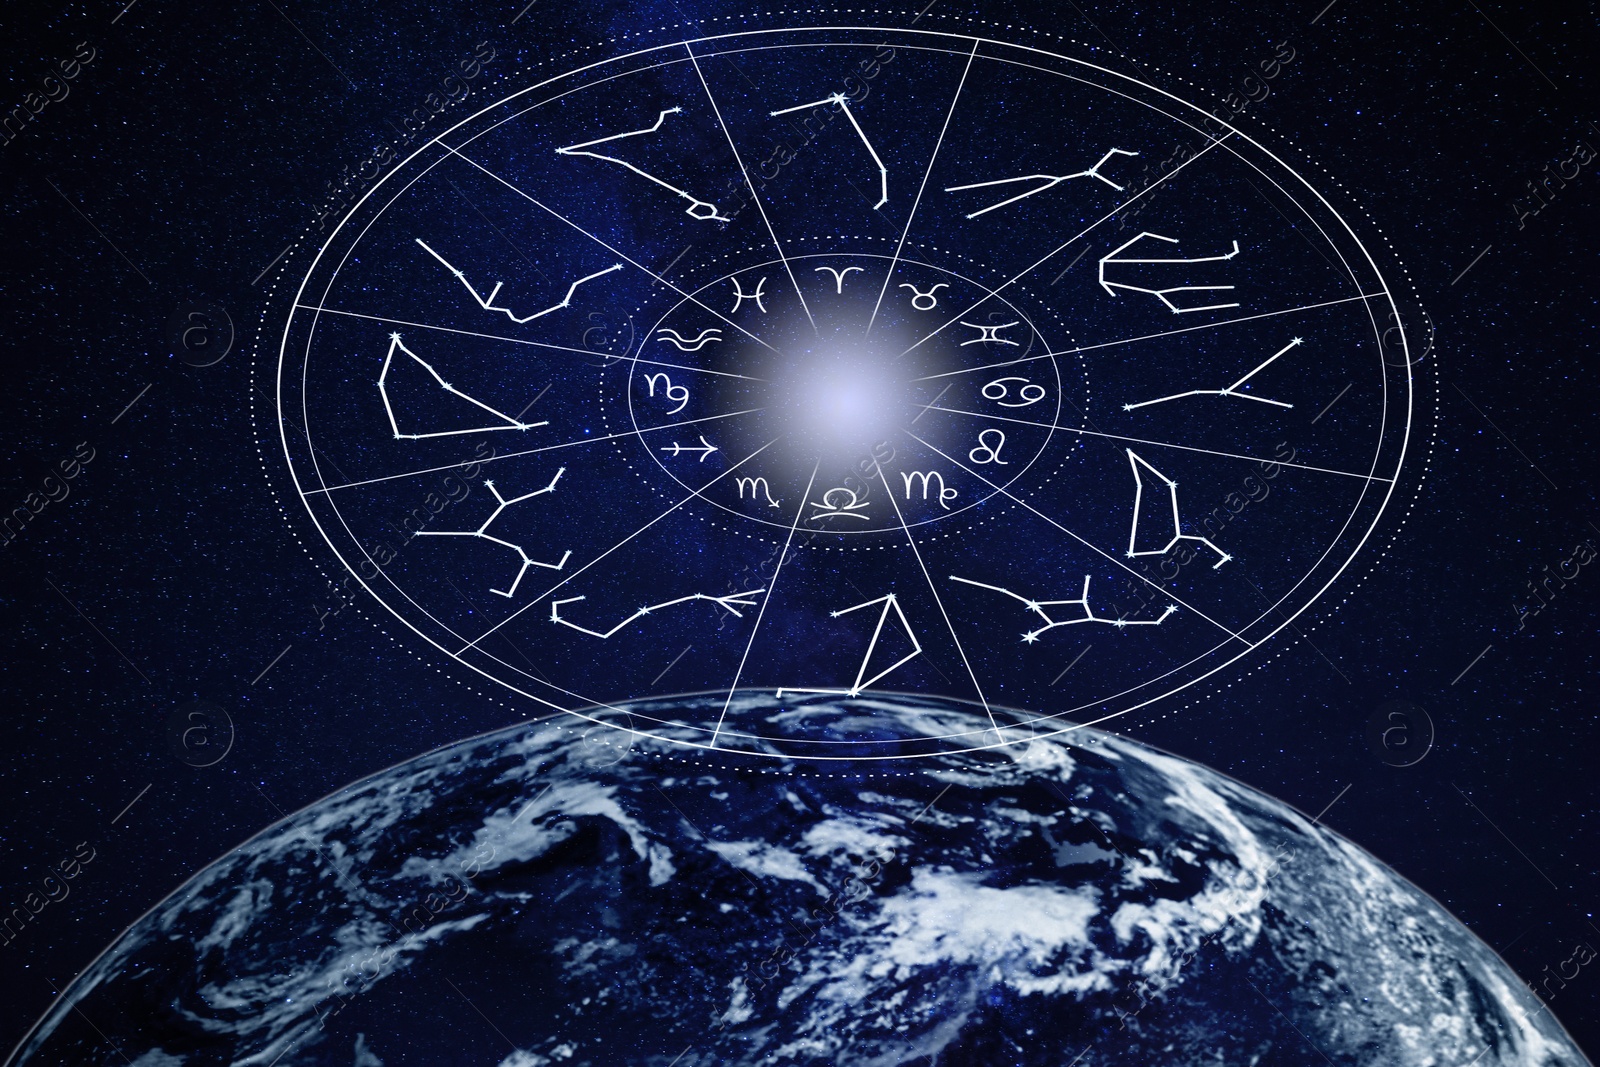 Image of Zodiac wheel with astrological signs and Eart in night sky, illustration